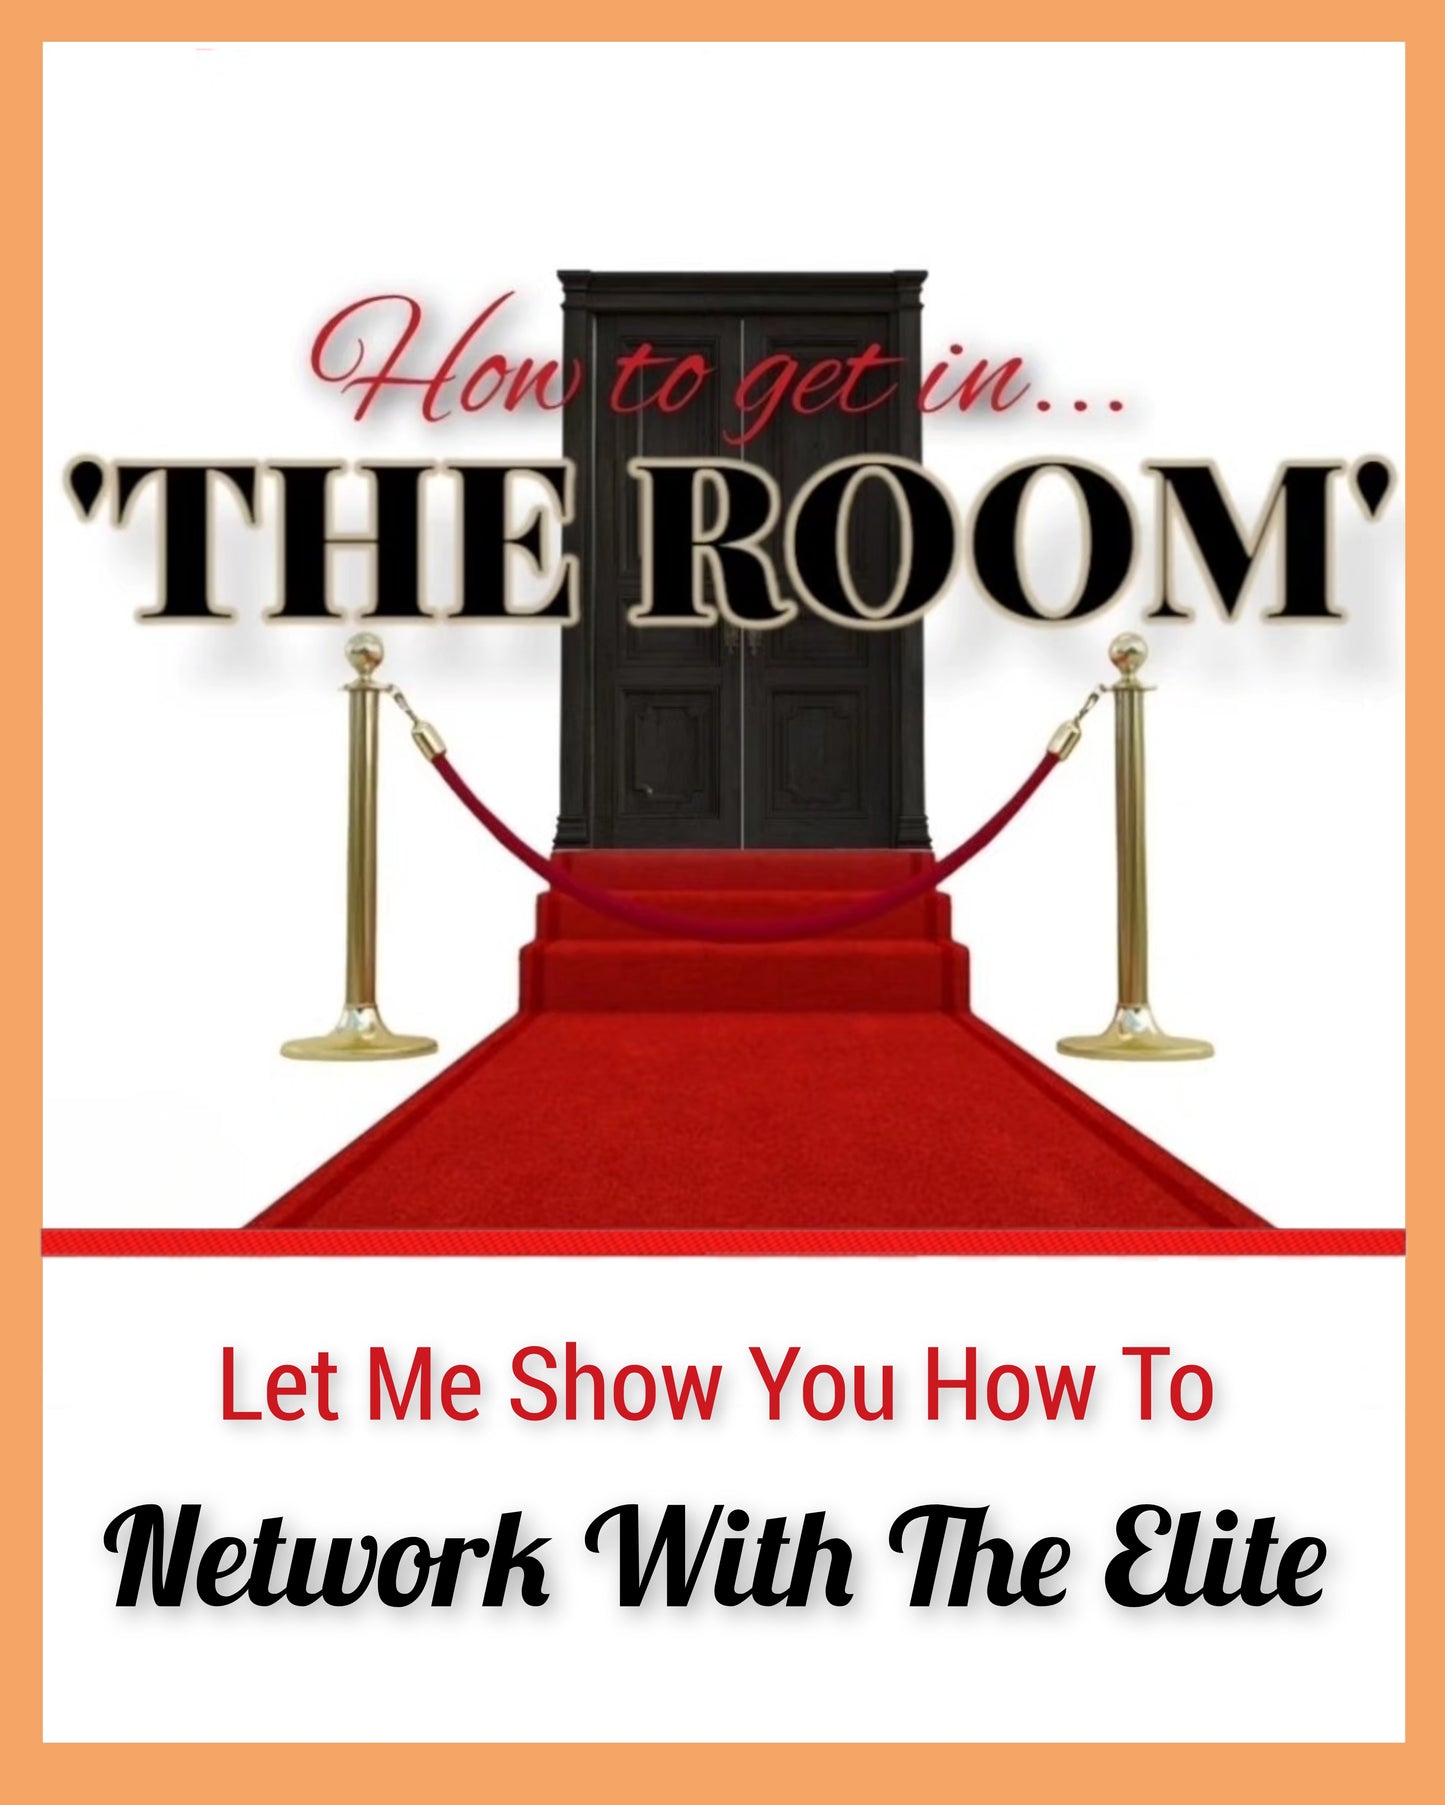 How To Get In 'THE ROOM'